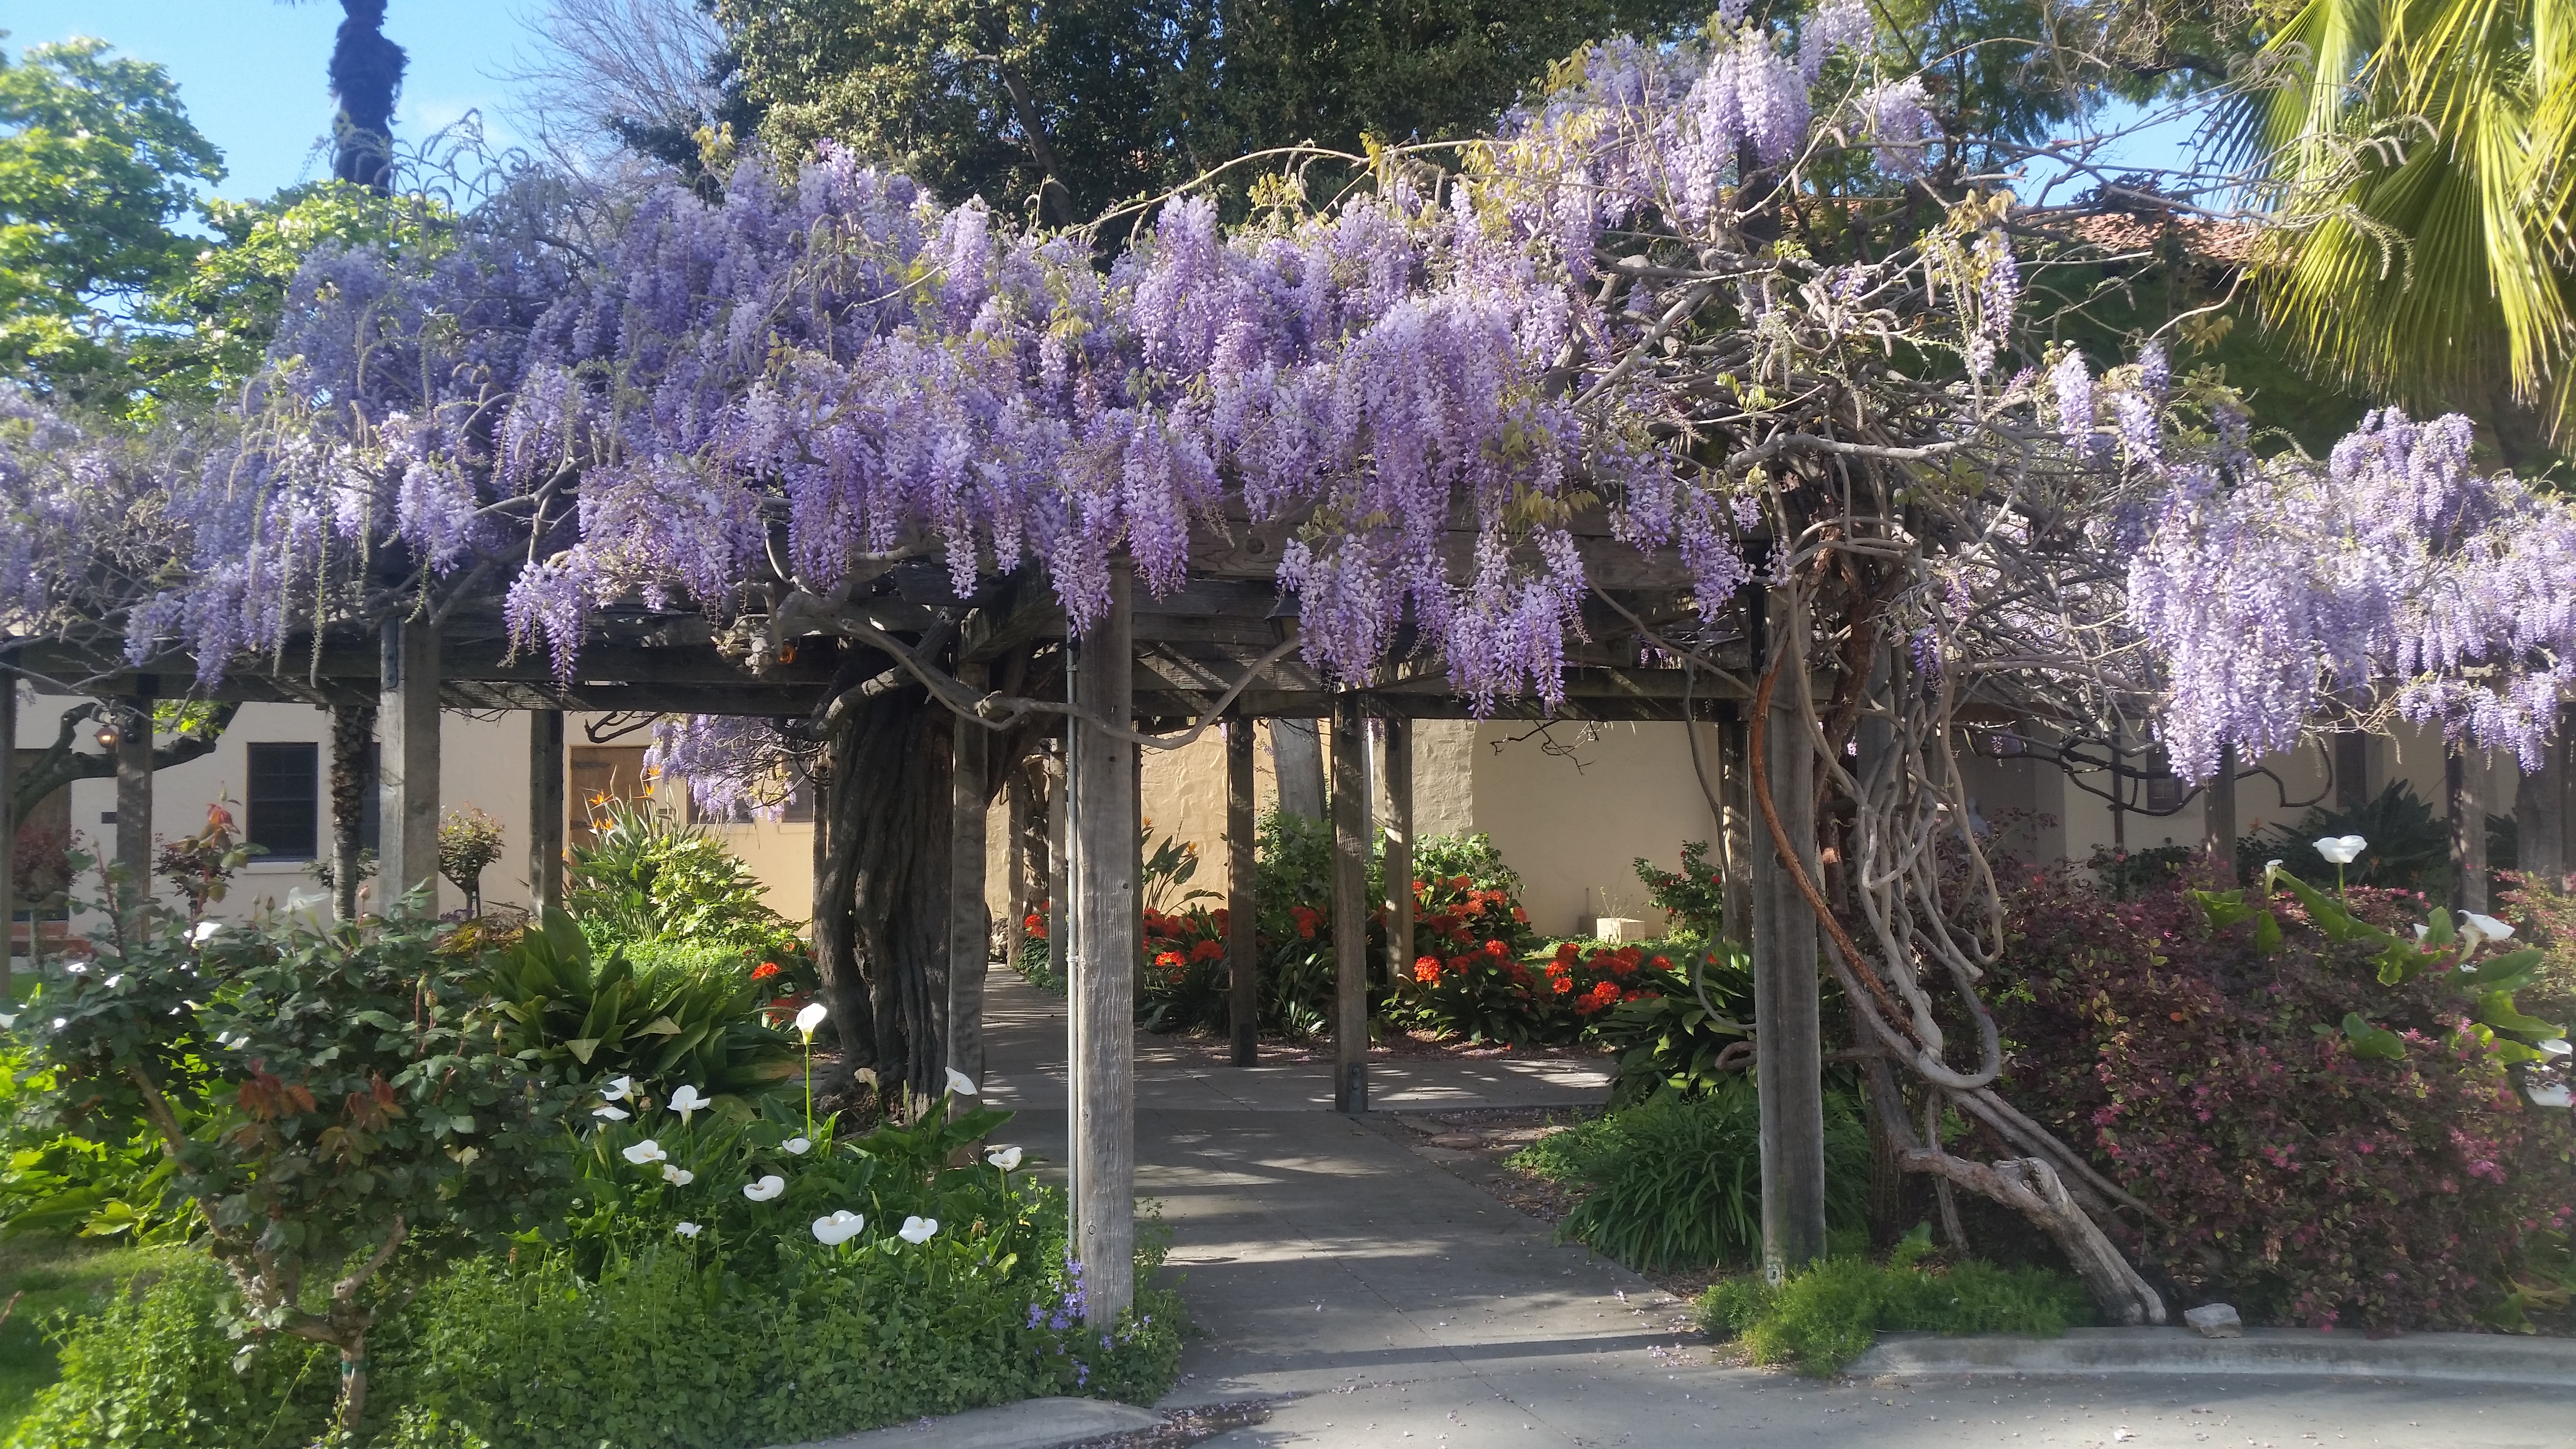 An Spanish mission overhung with wisteria